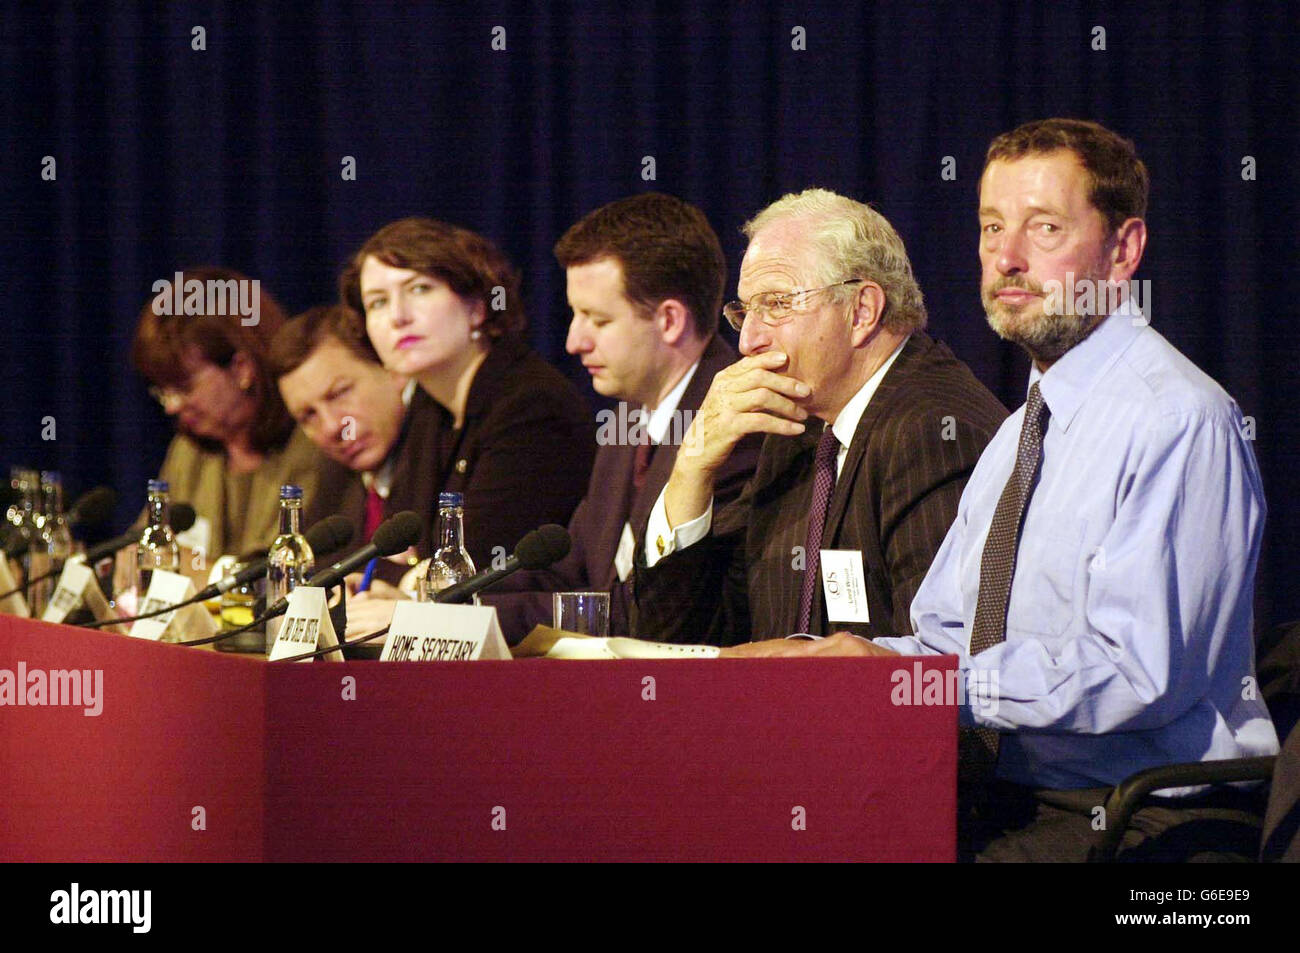 (From left - right) Solicitor-General for Scotland Elish Angiolini, Judge Alex Calabrese from Red Hook Community Court in USA, Community Prosecution Chief Jennifer Etheridge, Christopher Leslie MP, The Lord Chief Justice Lord Woolf and David Blunkett......... ............ during the conference entitled 'Criminal Justice Serving the Community' at the Queen Elizabeth II Conference Centre in central London. * Speaking at a major conference in London, Mr Blunkett called for a step change in law and order so that judges, prosecutors and defence lawyers all work to improve their communities. Stock Photo